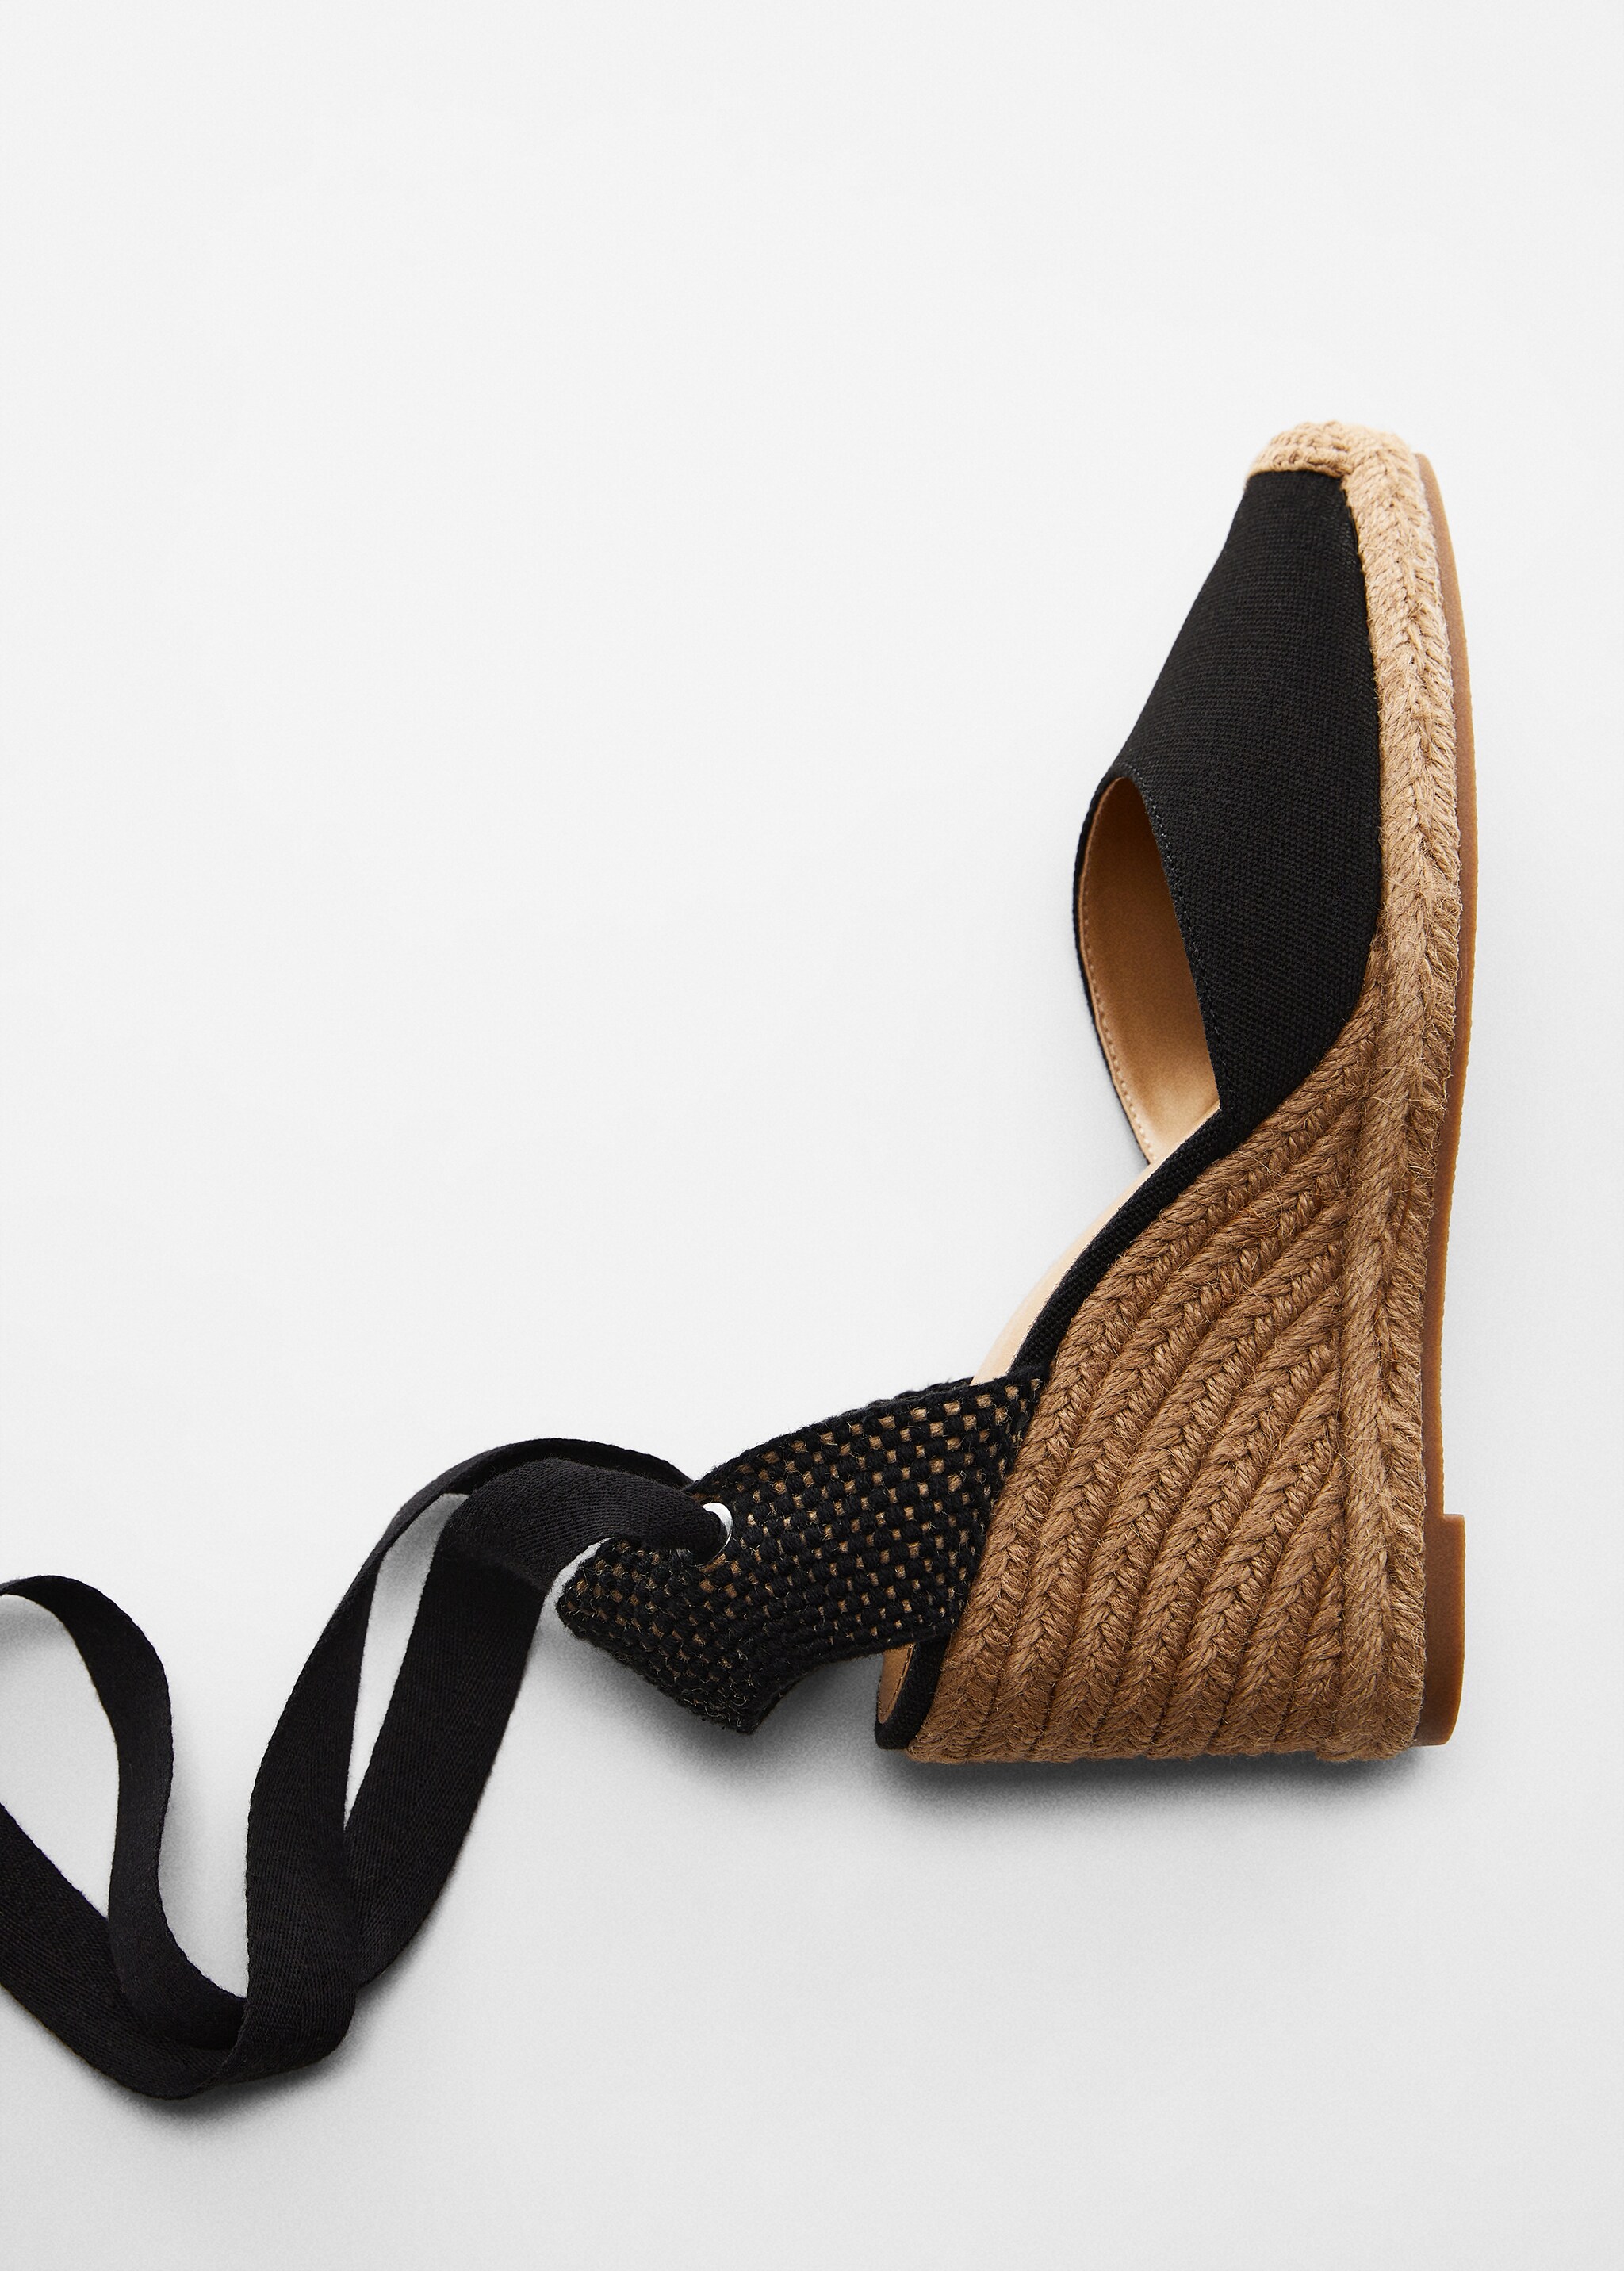 Lace-up espadrilles - Details of the article 5